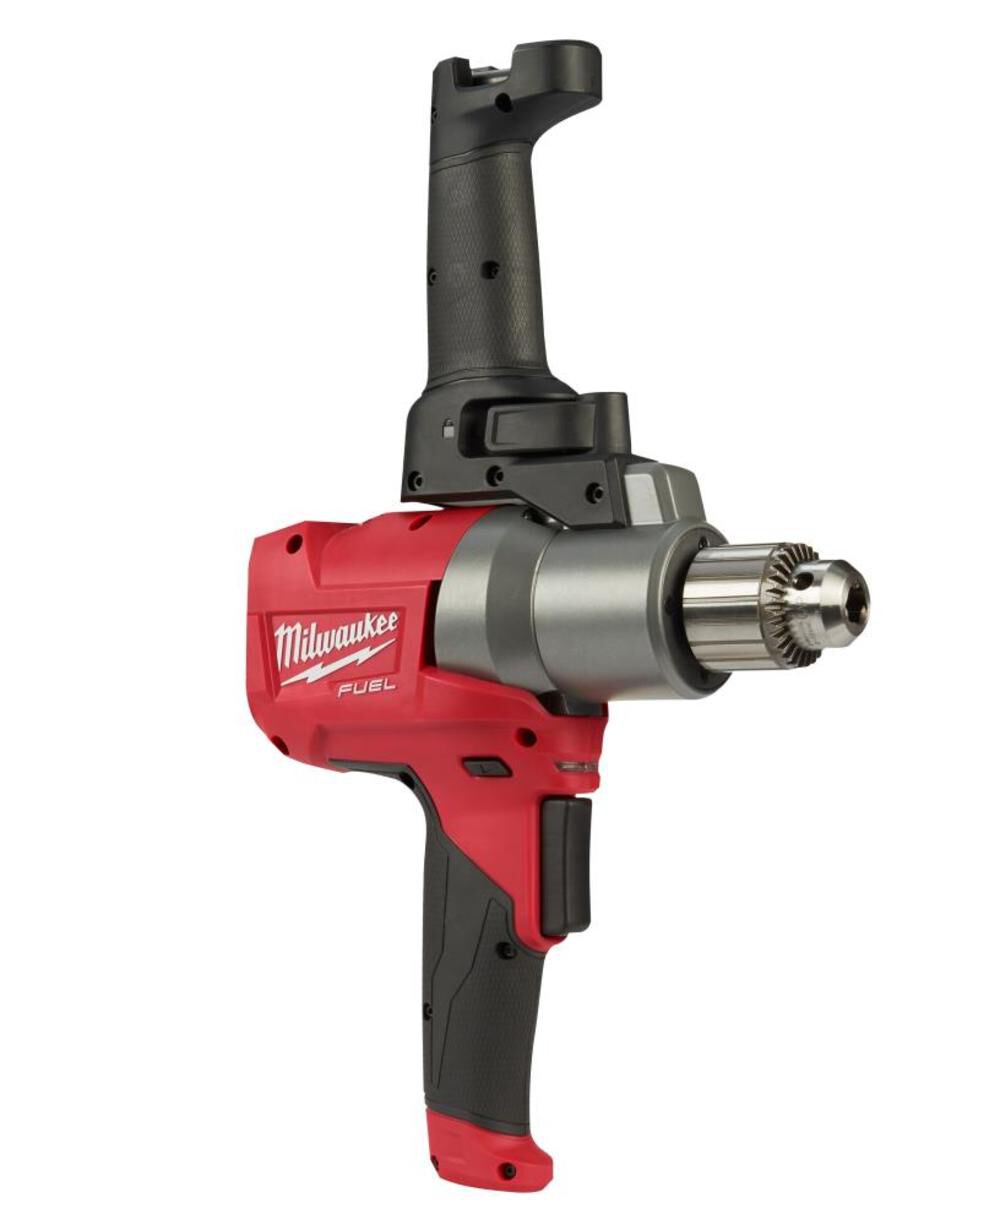 Milwaukee M18 FUEL Mud Mixer with 180 Degree Handle (Bare Tool) 2810-20  from Milwaukee - Acme Tools